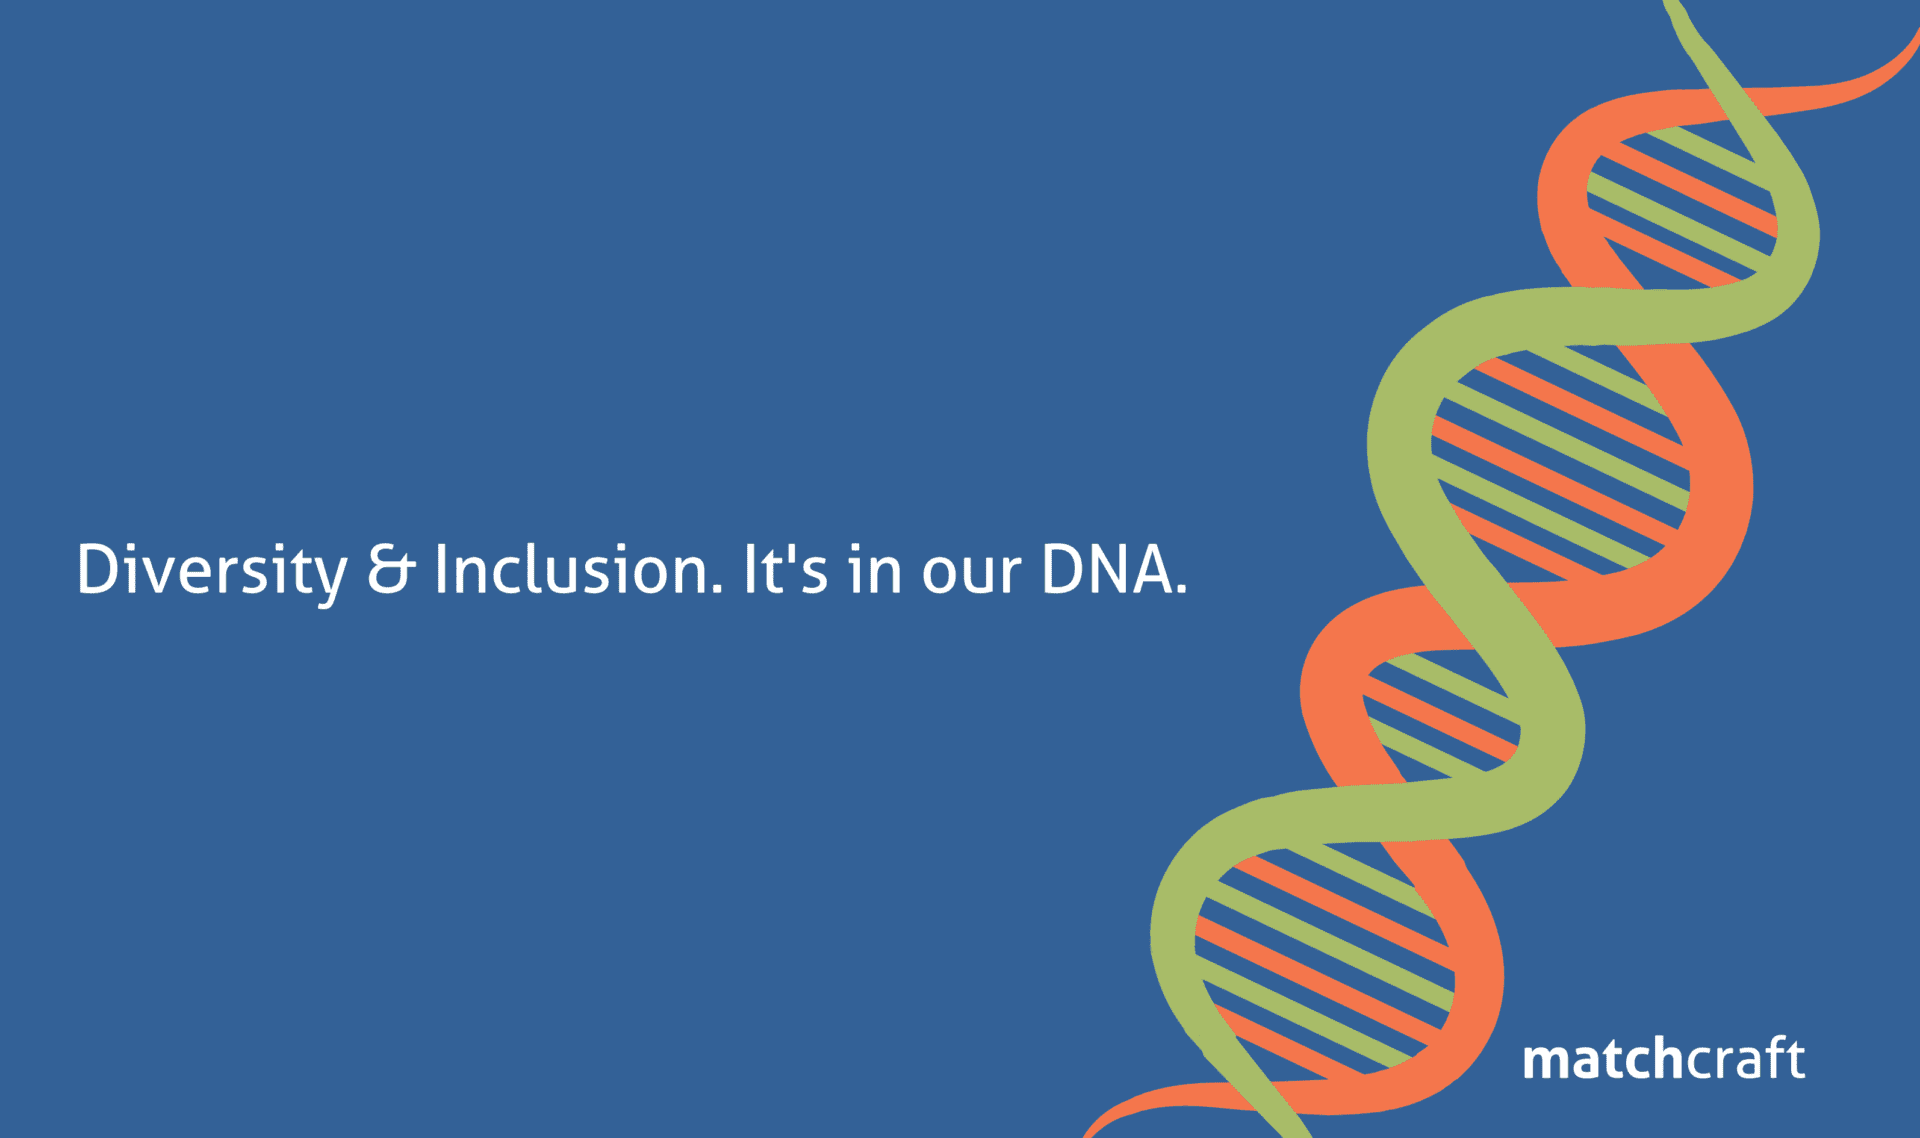 Diversity and Inclusion. It’s in our DNA.